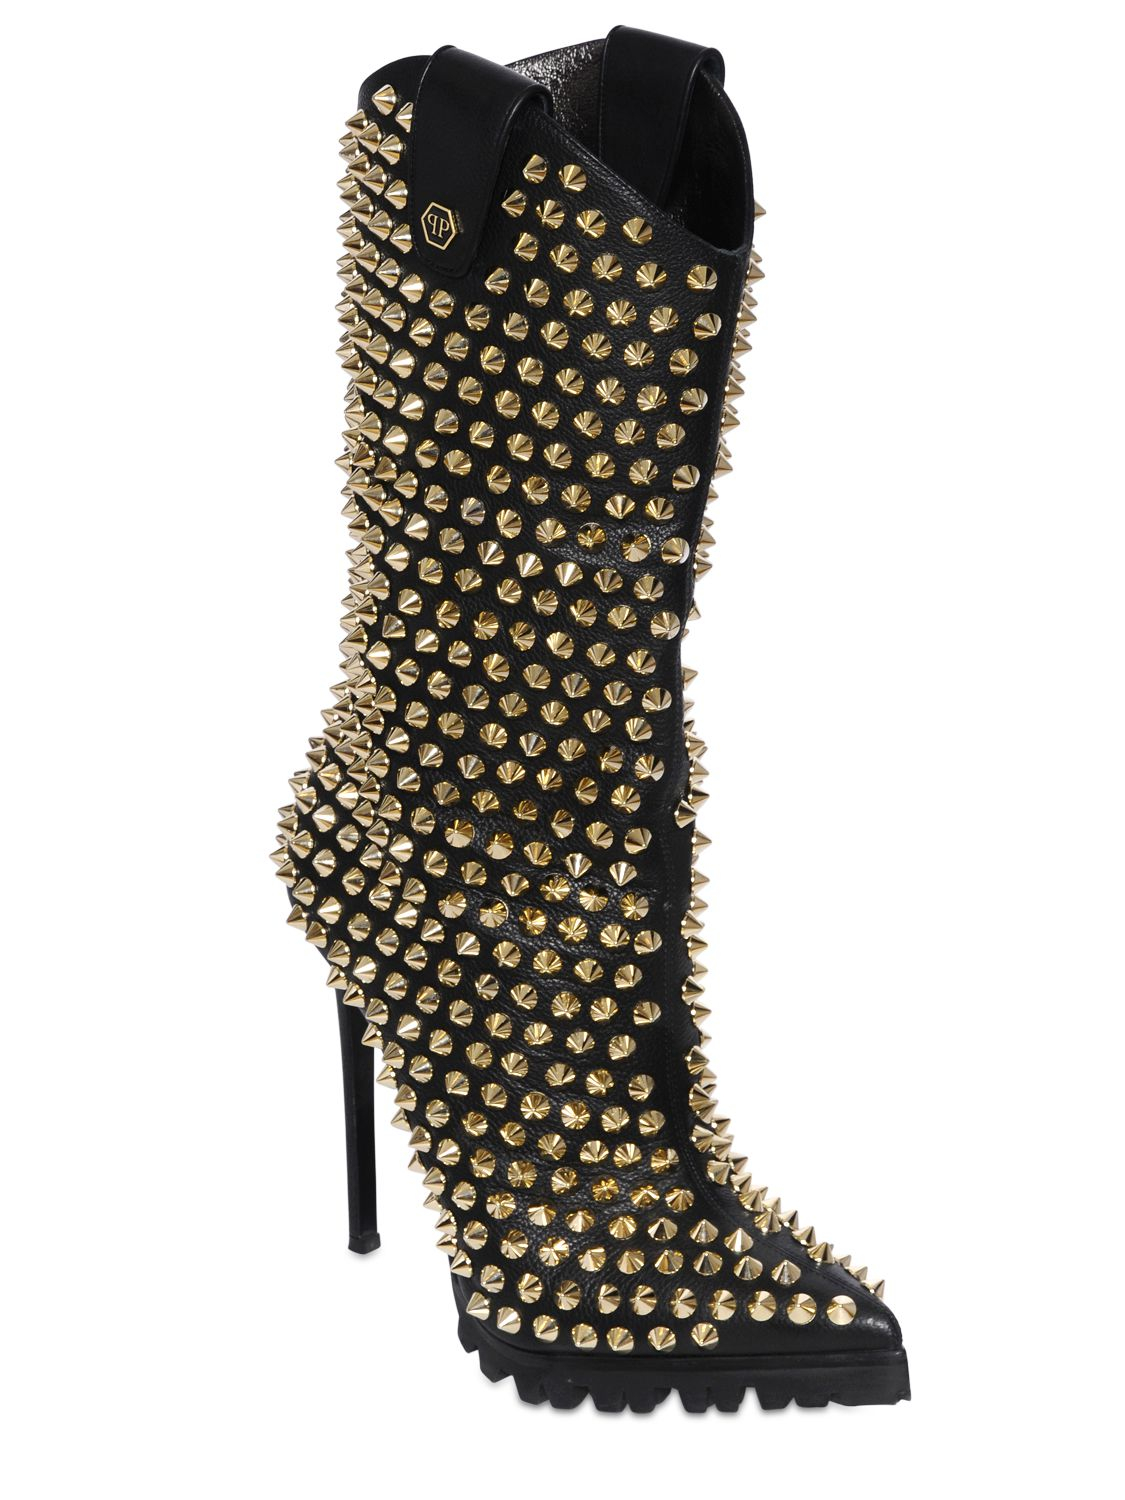 Philipp Plein 140mm Studded Nappa Leather Cowboy Boots in Black | Lyst